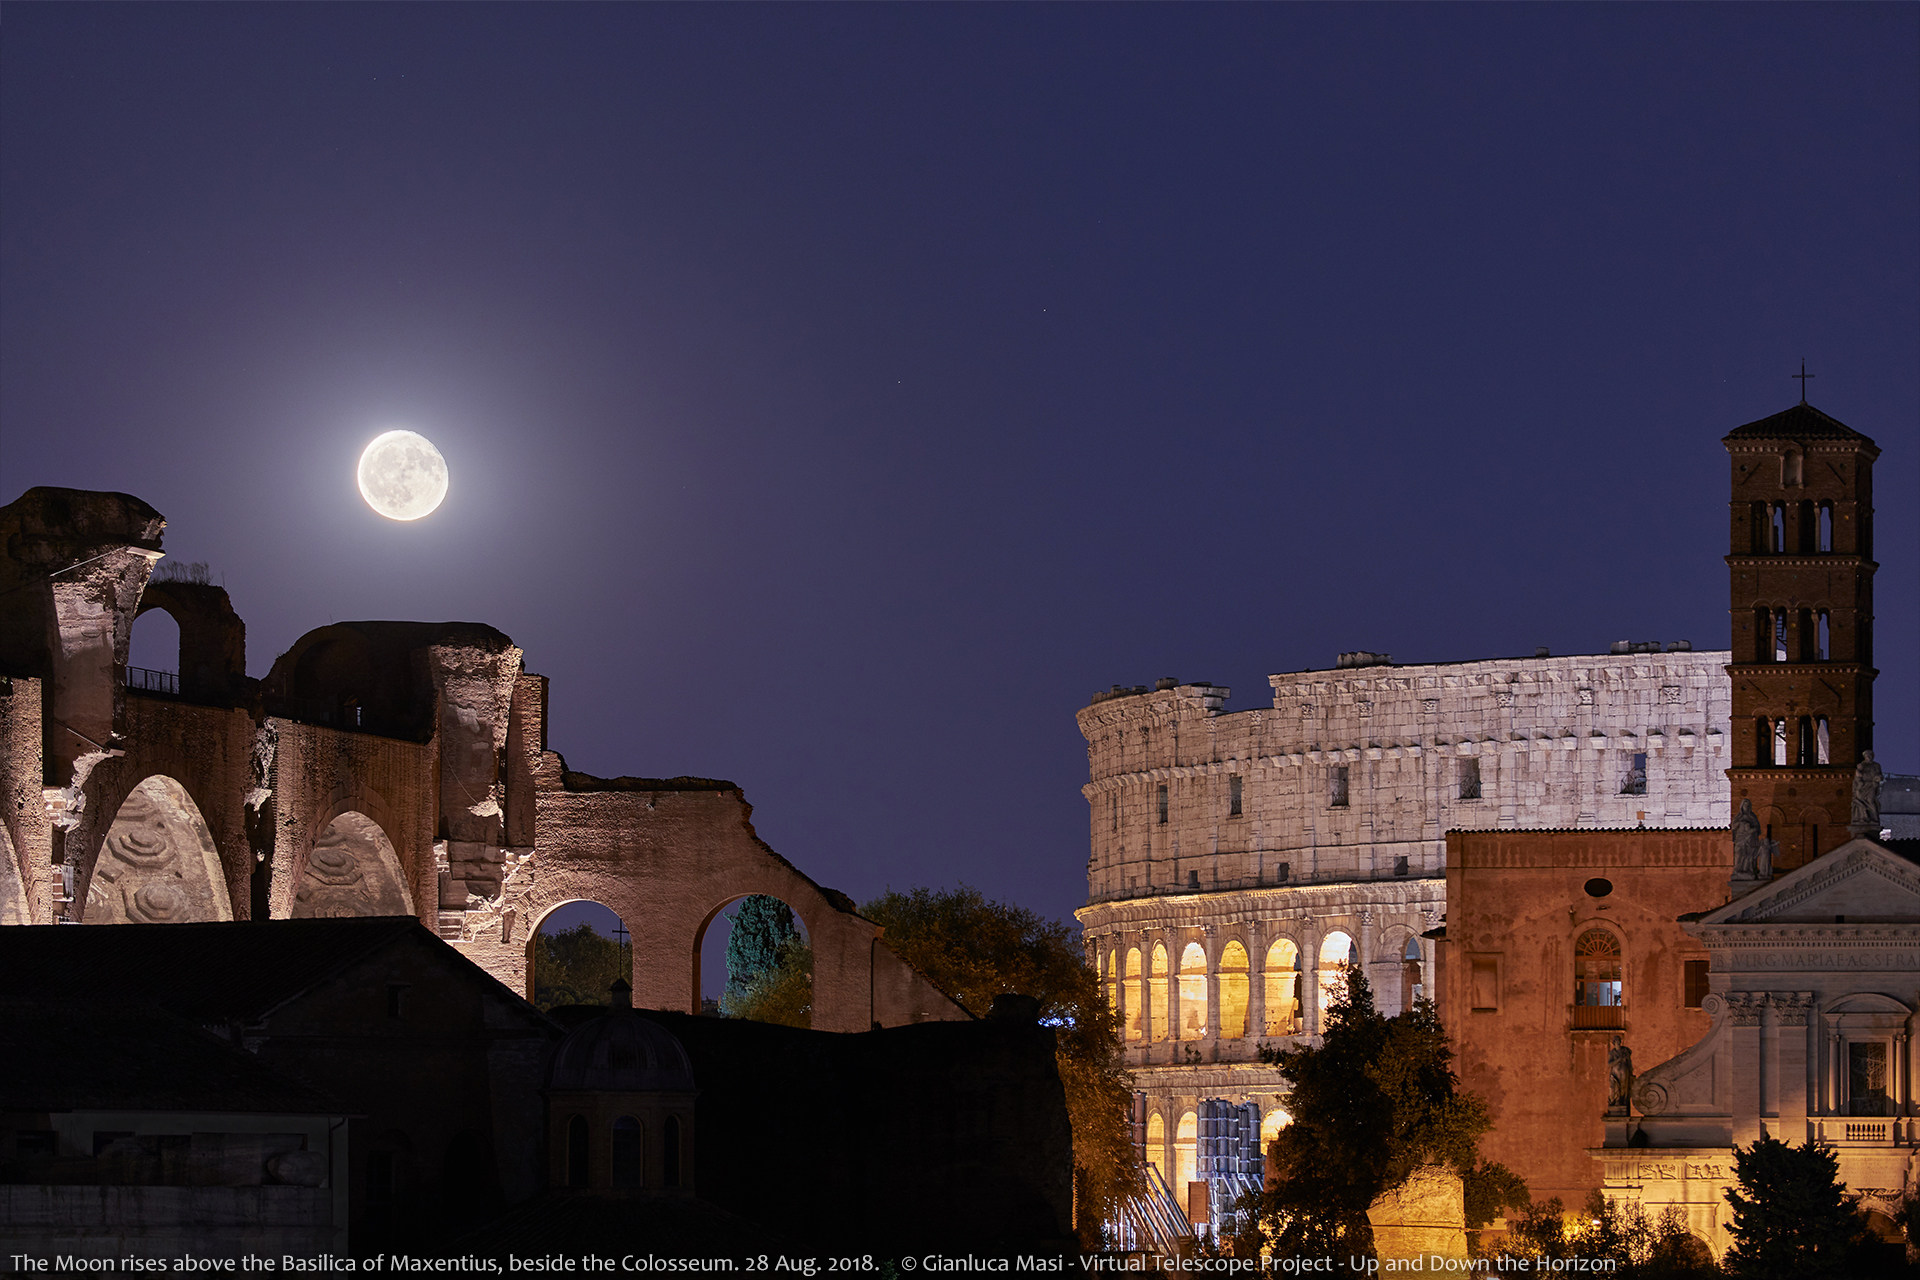 The Moon enters the scene on the Basilica of Maxentius , with the Colosseum on the right - 28 Aug. 2018